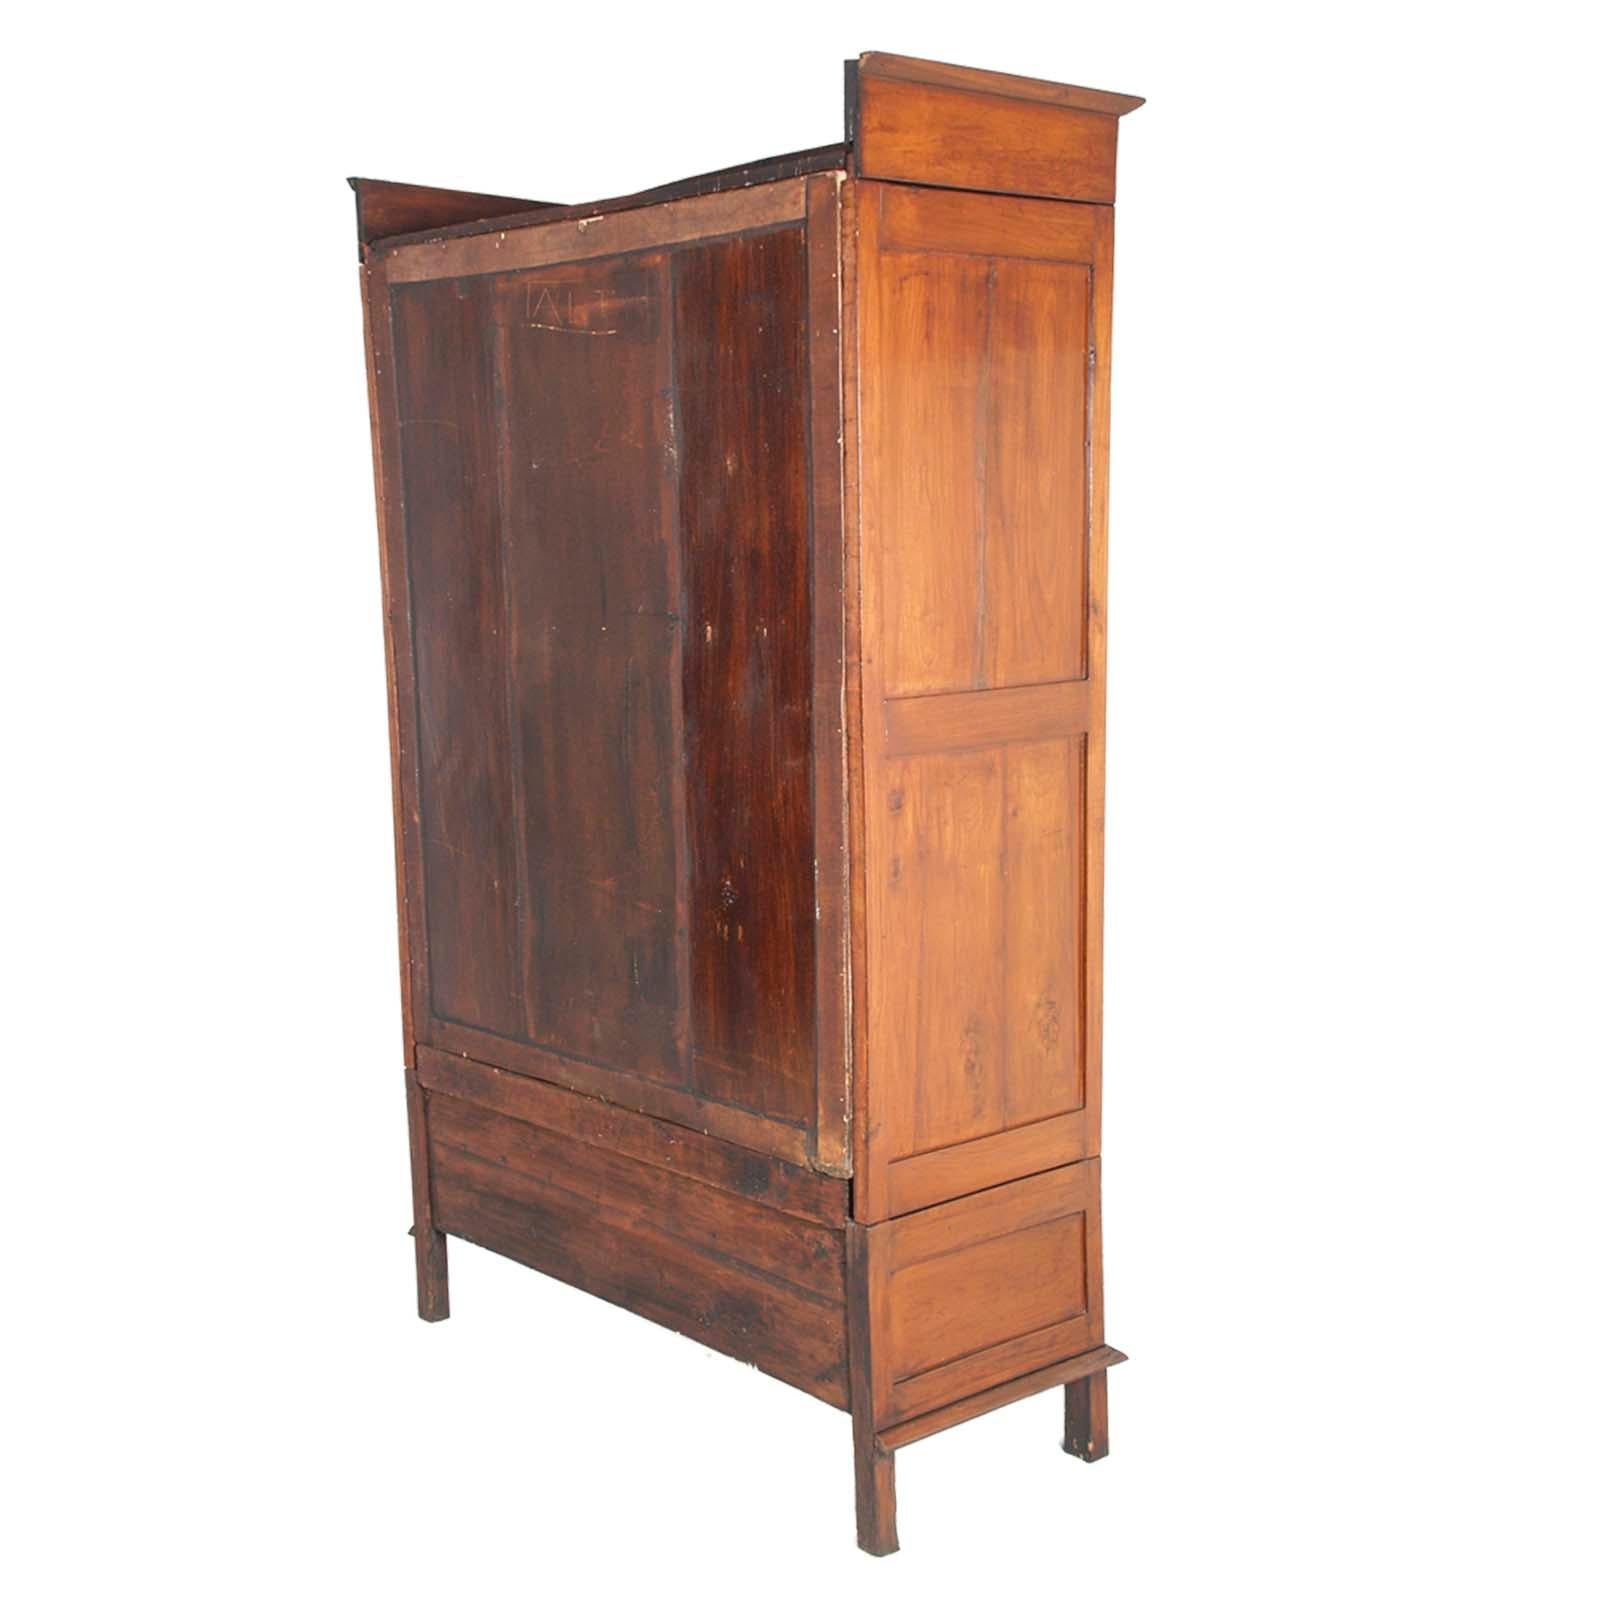 19th Century Florentine Art Nouveau Wardrobe in Solid Cherry Wood by Dini & Puccini, Cascina For Sale